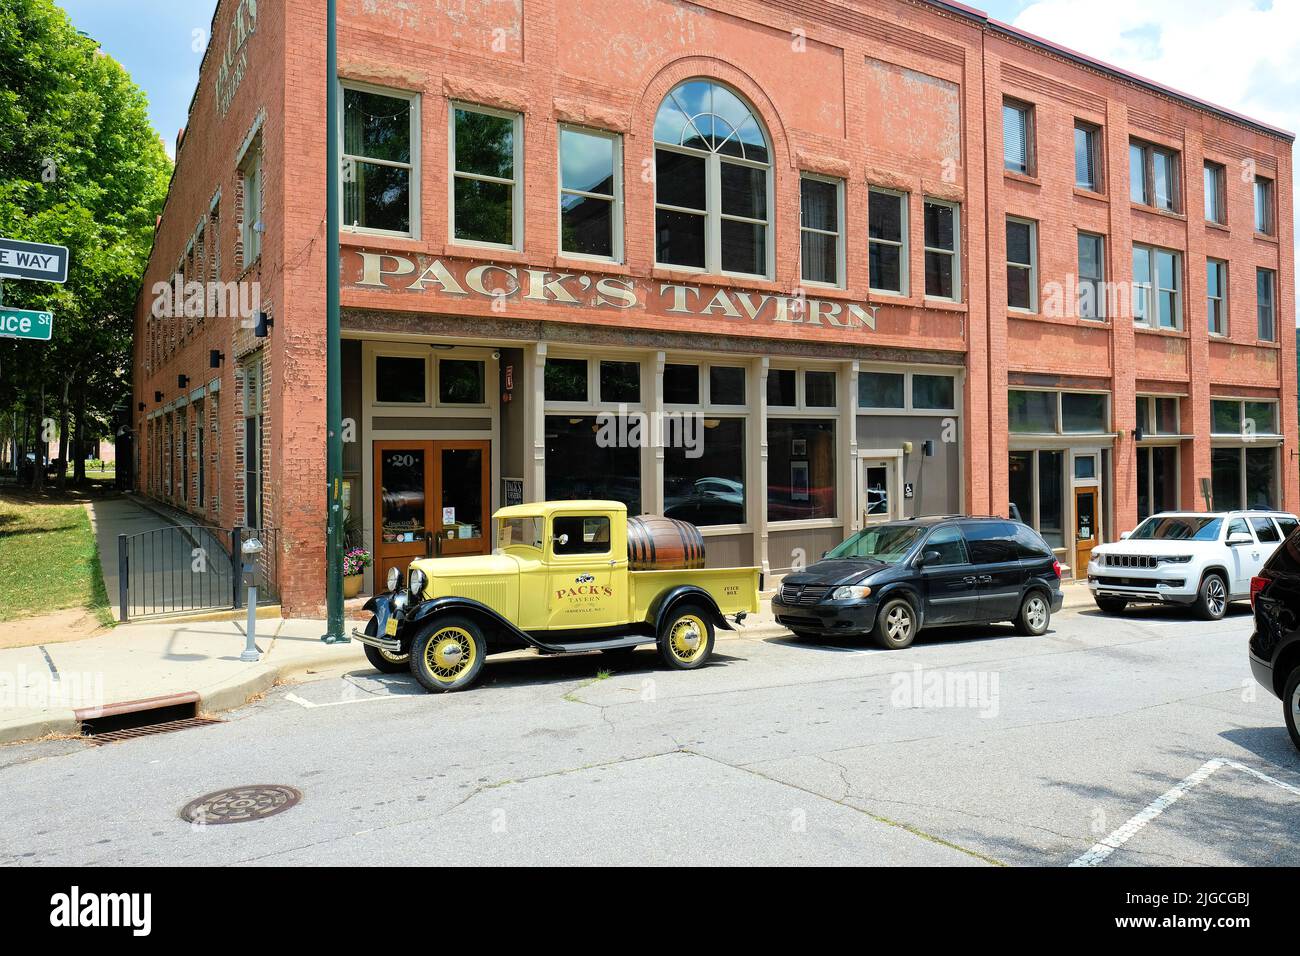 Pack's Tavern, next to Pack Square Park in downtown Asheville, North Carolina; bar, restaurant, dining; old yellow Ford pick up truck out front. Stock Photo